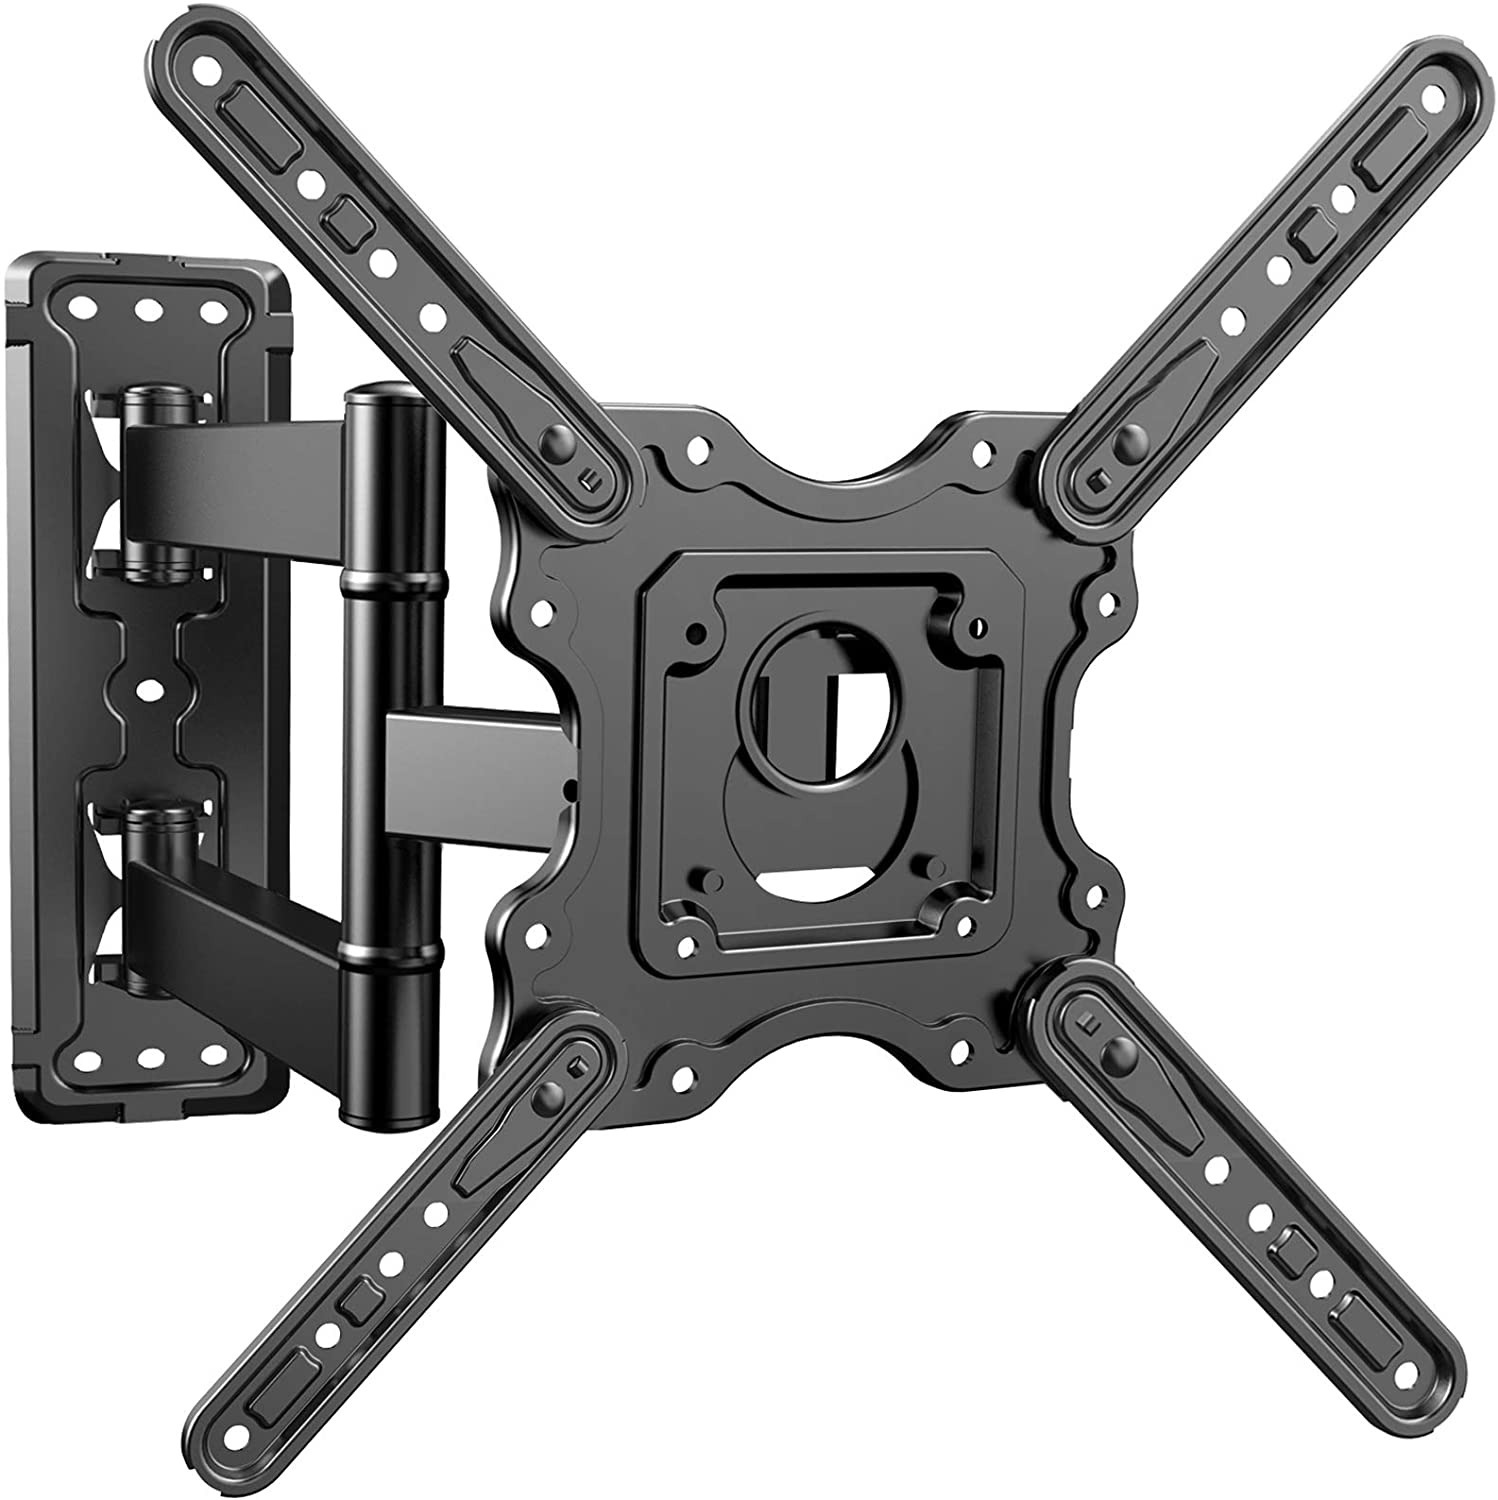 PERLESMITH UL Listed Heavy Duty TV Wall Mount for Most 26-55 inch $12.95 + FS with PRIME